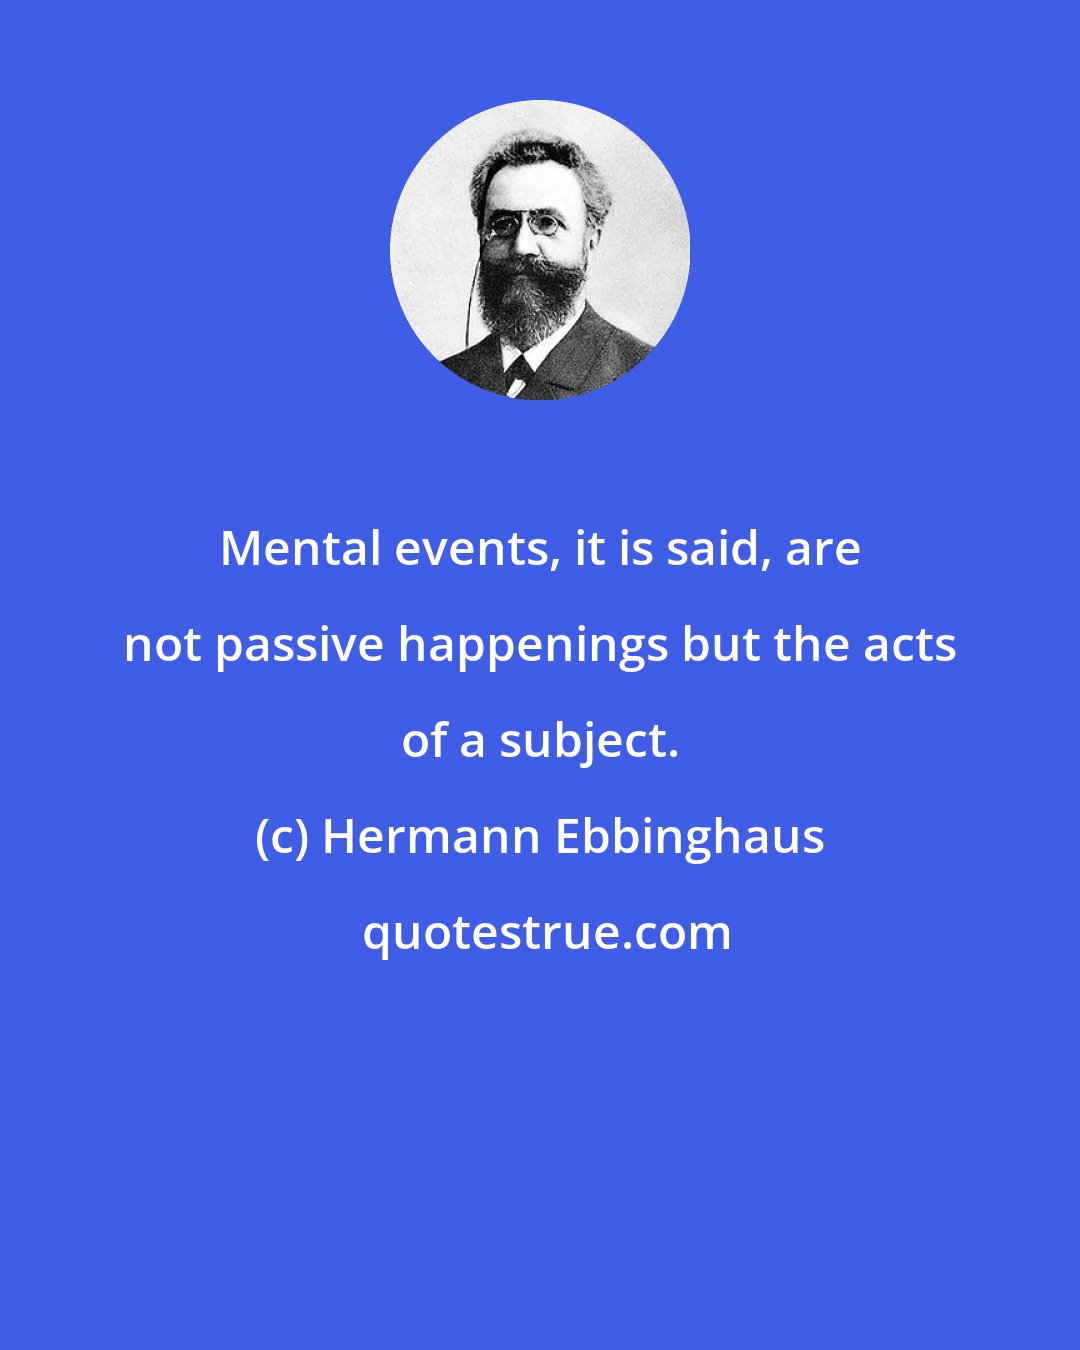 Hermann Ebbinghaus: Mental events, it is said, are not passive happenings but the acts of a subject.